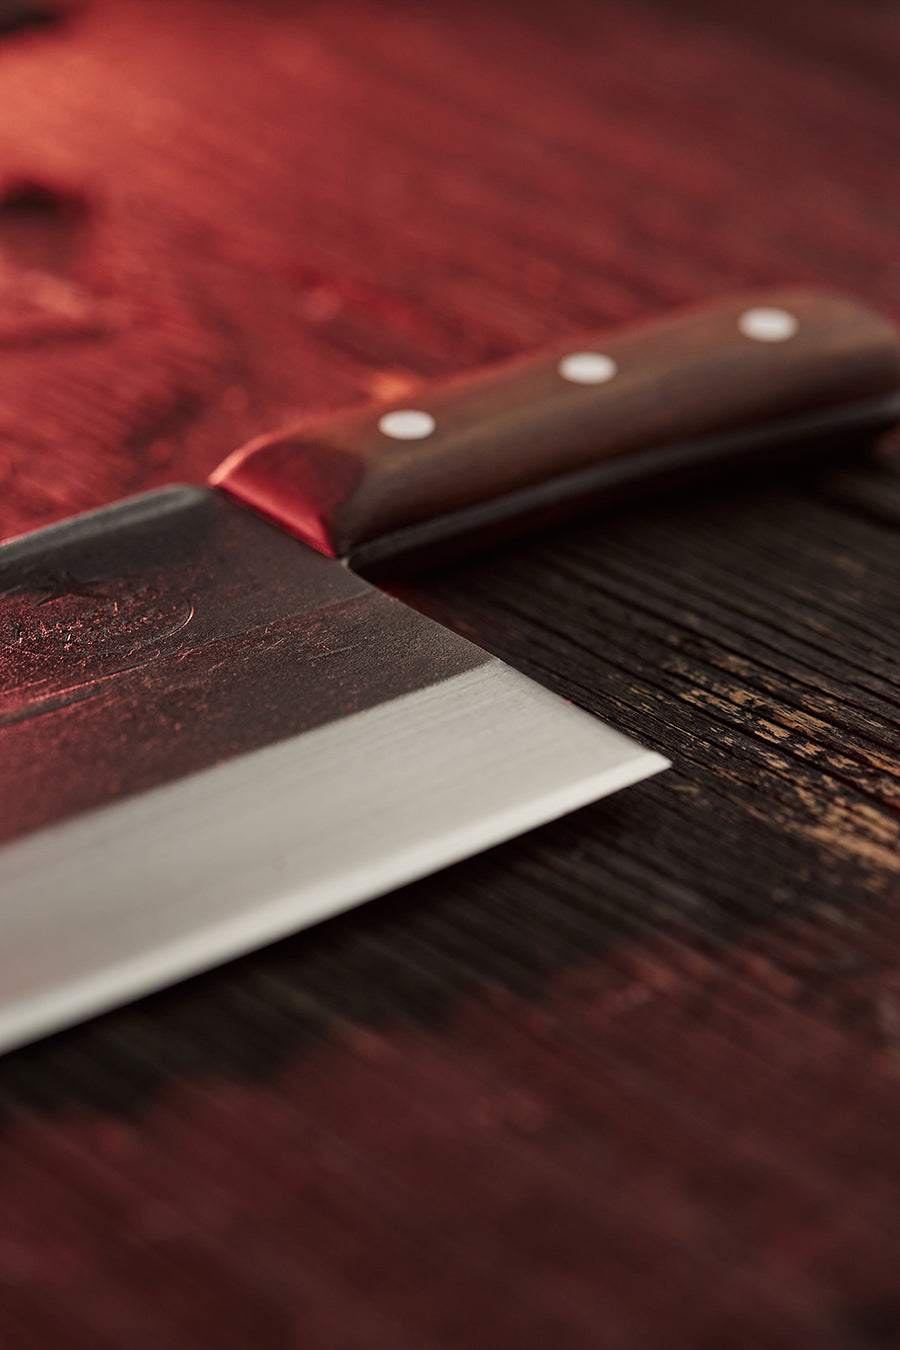 Blade and handle of the Serbian Chef Knife in focus, on a wooden table illuminated by a faint red light.